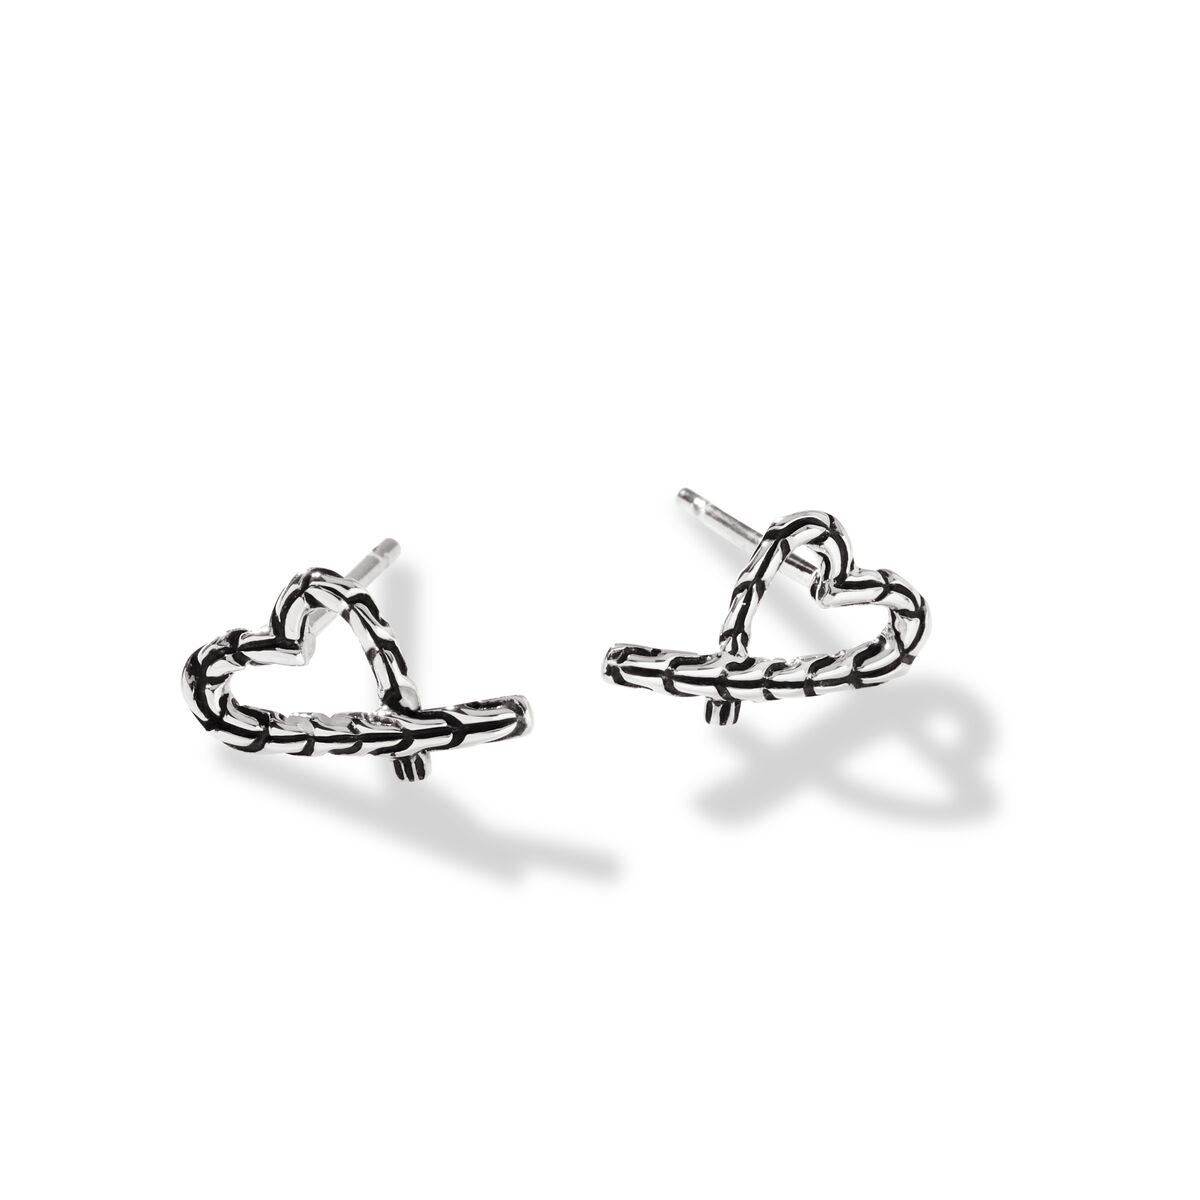 John Hardy Classic Chain Collection Manah Heart Stud Earrings in Sterling Silver